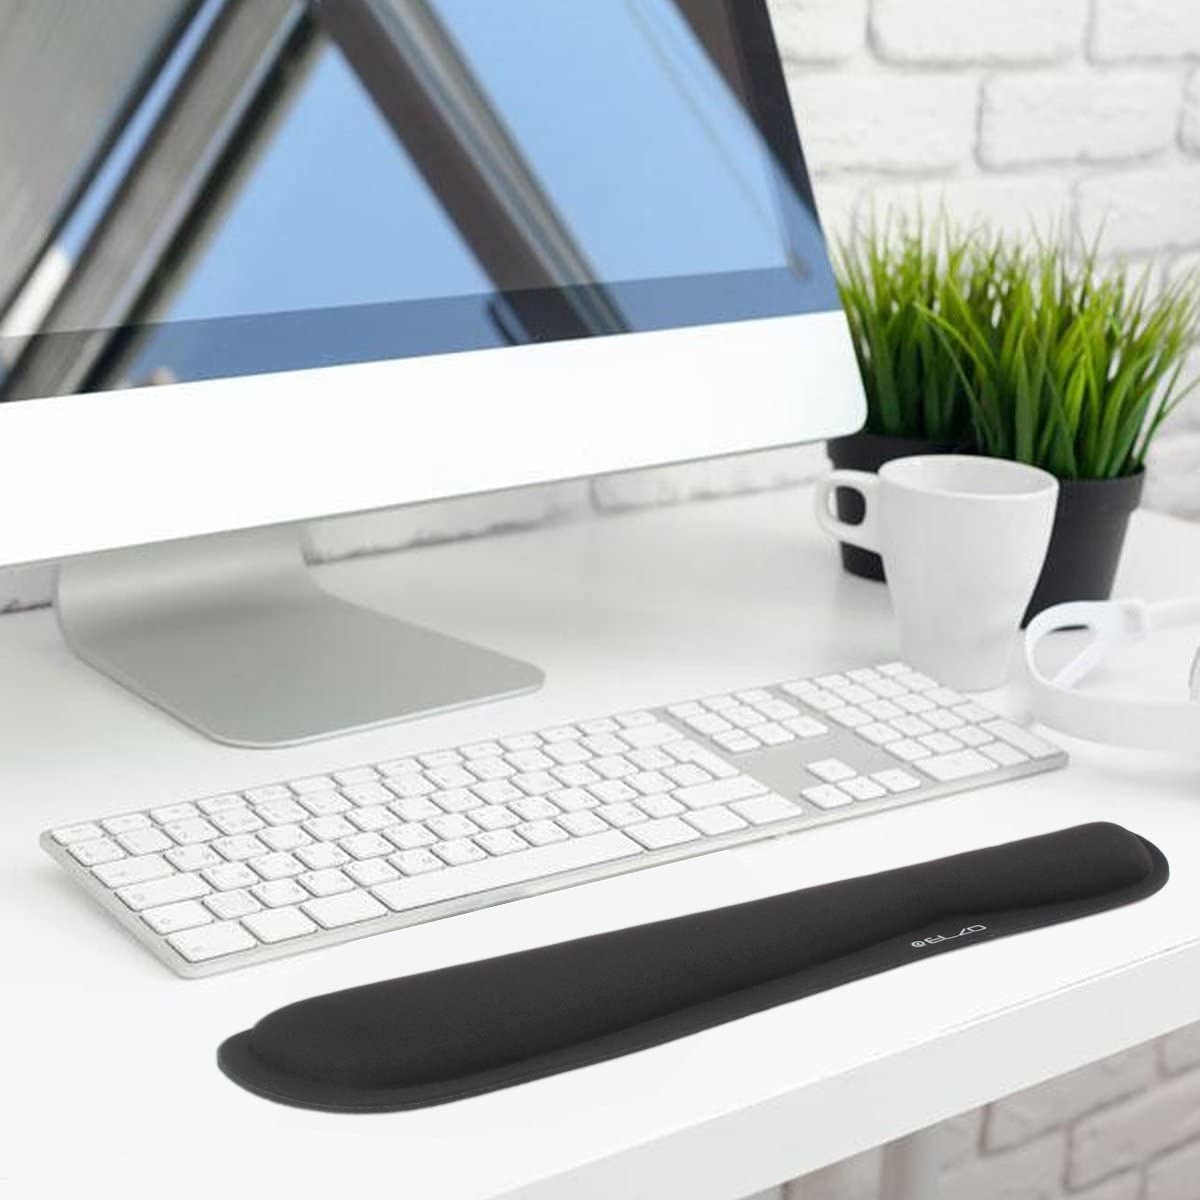 The wrist rest on a desk in front of a keyboard